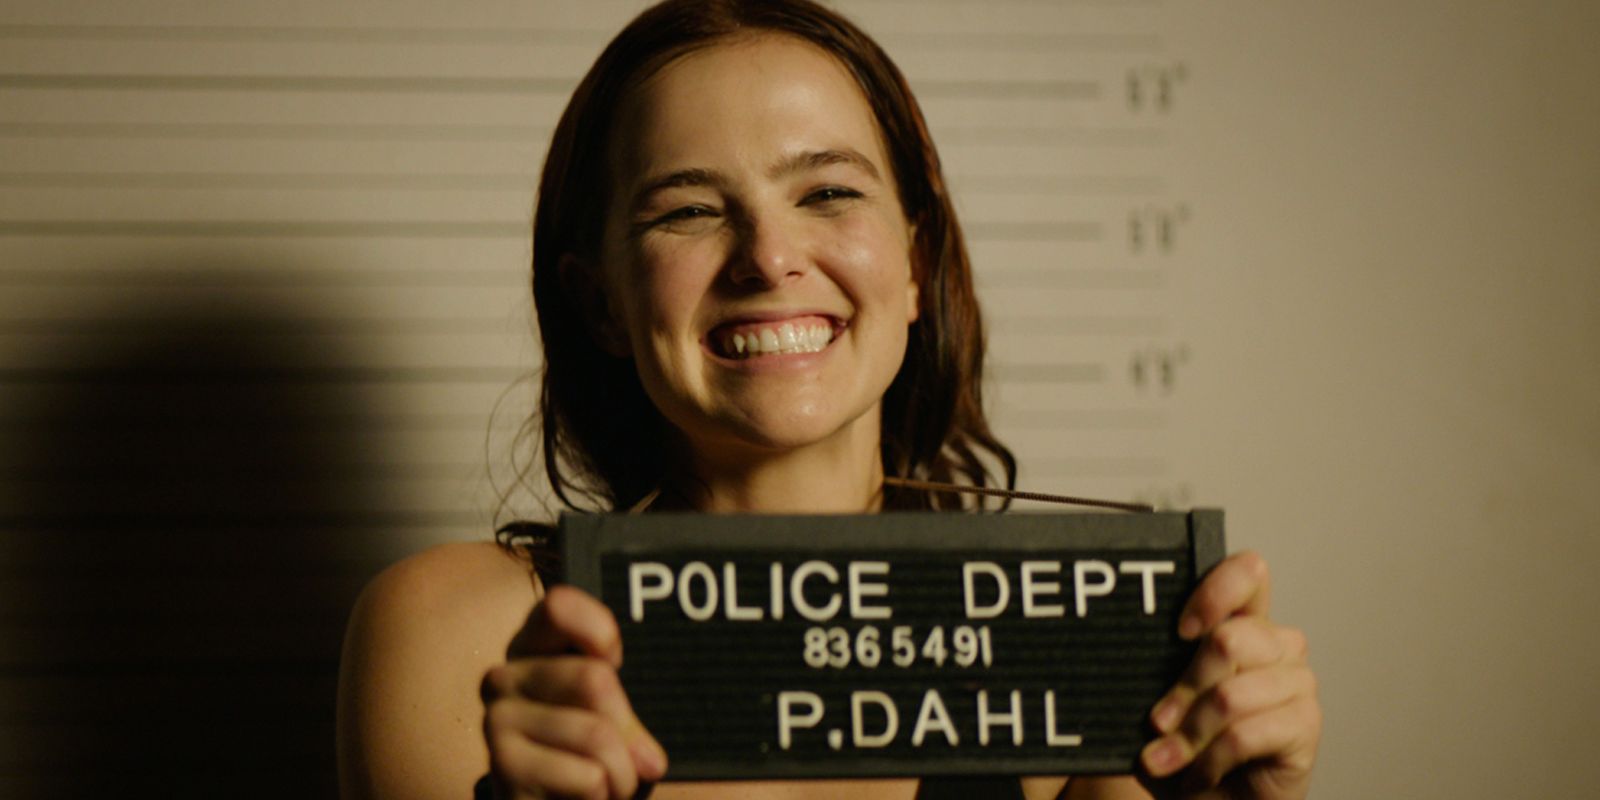 Zoey Deutch poses for a mugshot in Buffaloed